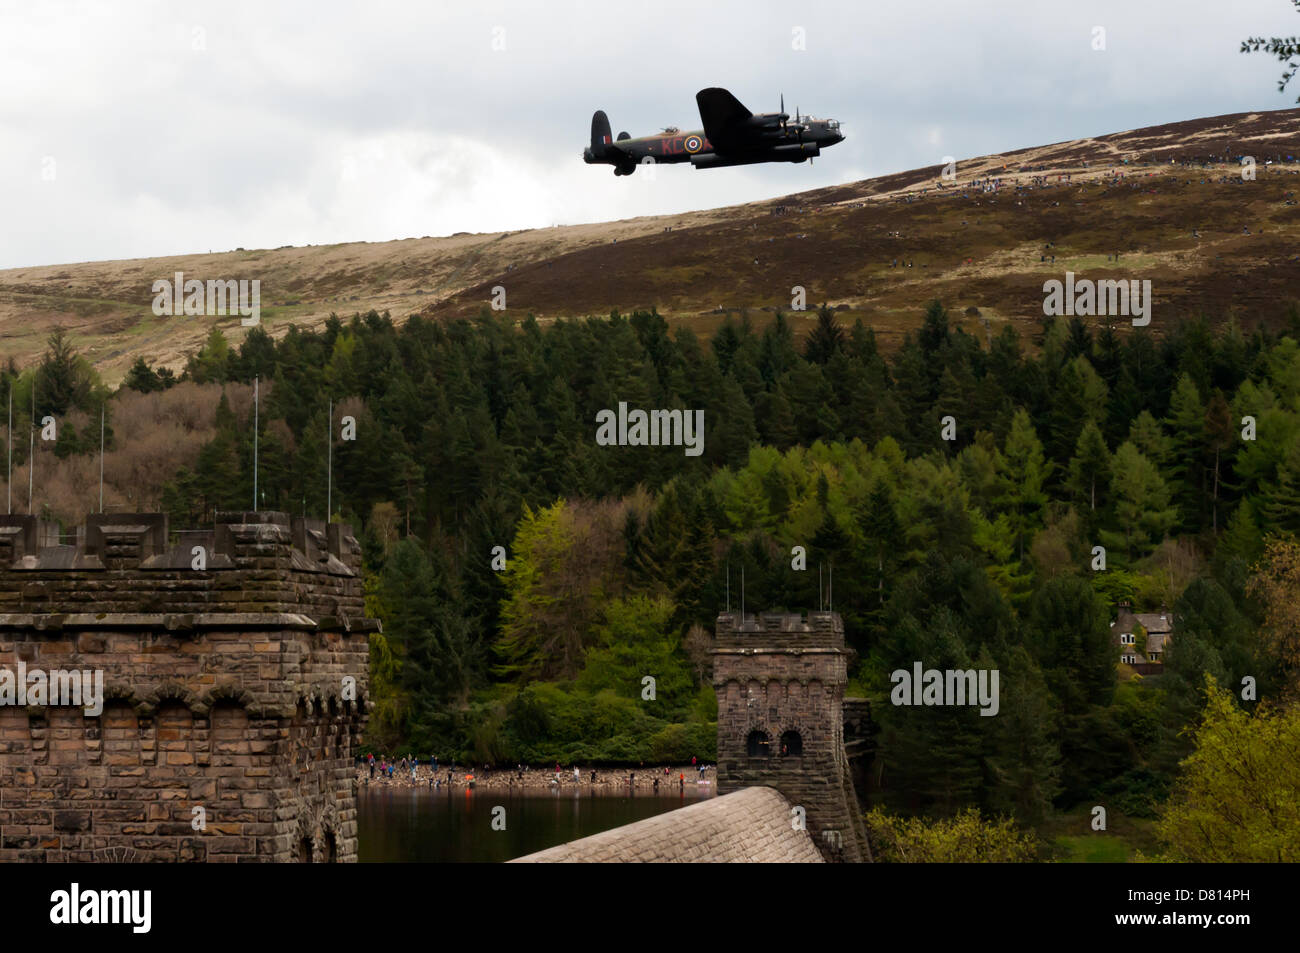 The Lancaster Bomber of the Battle of Britain Memorial Flight flies low over the Derwent reservoir dam, commemorating the 70th anniversary of the raid by 617 ‘Dambusters’ Squadron on the night 16-17 May 1943. Stock Photo